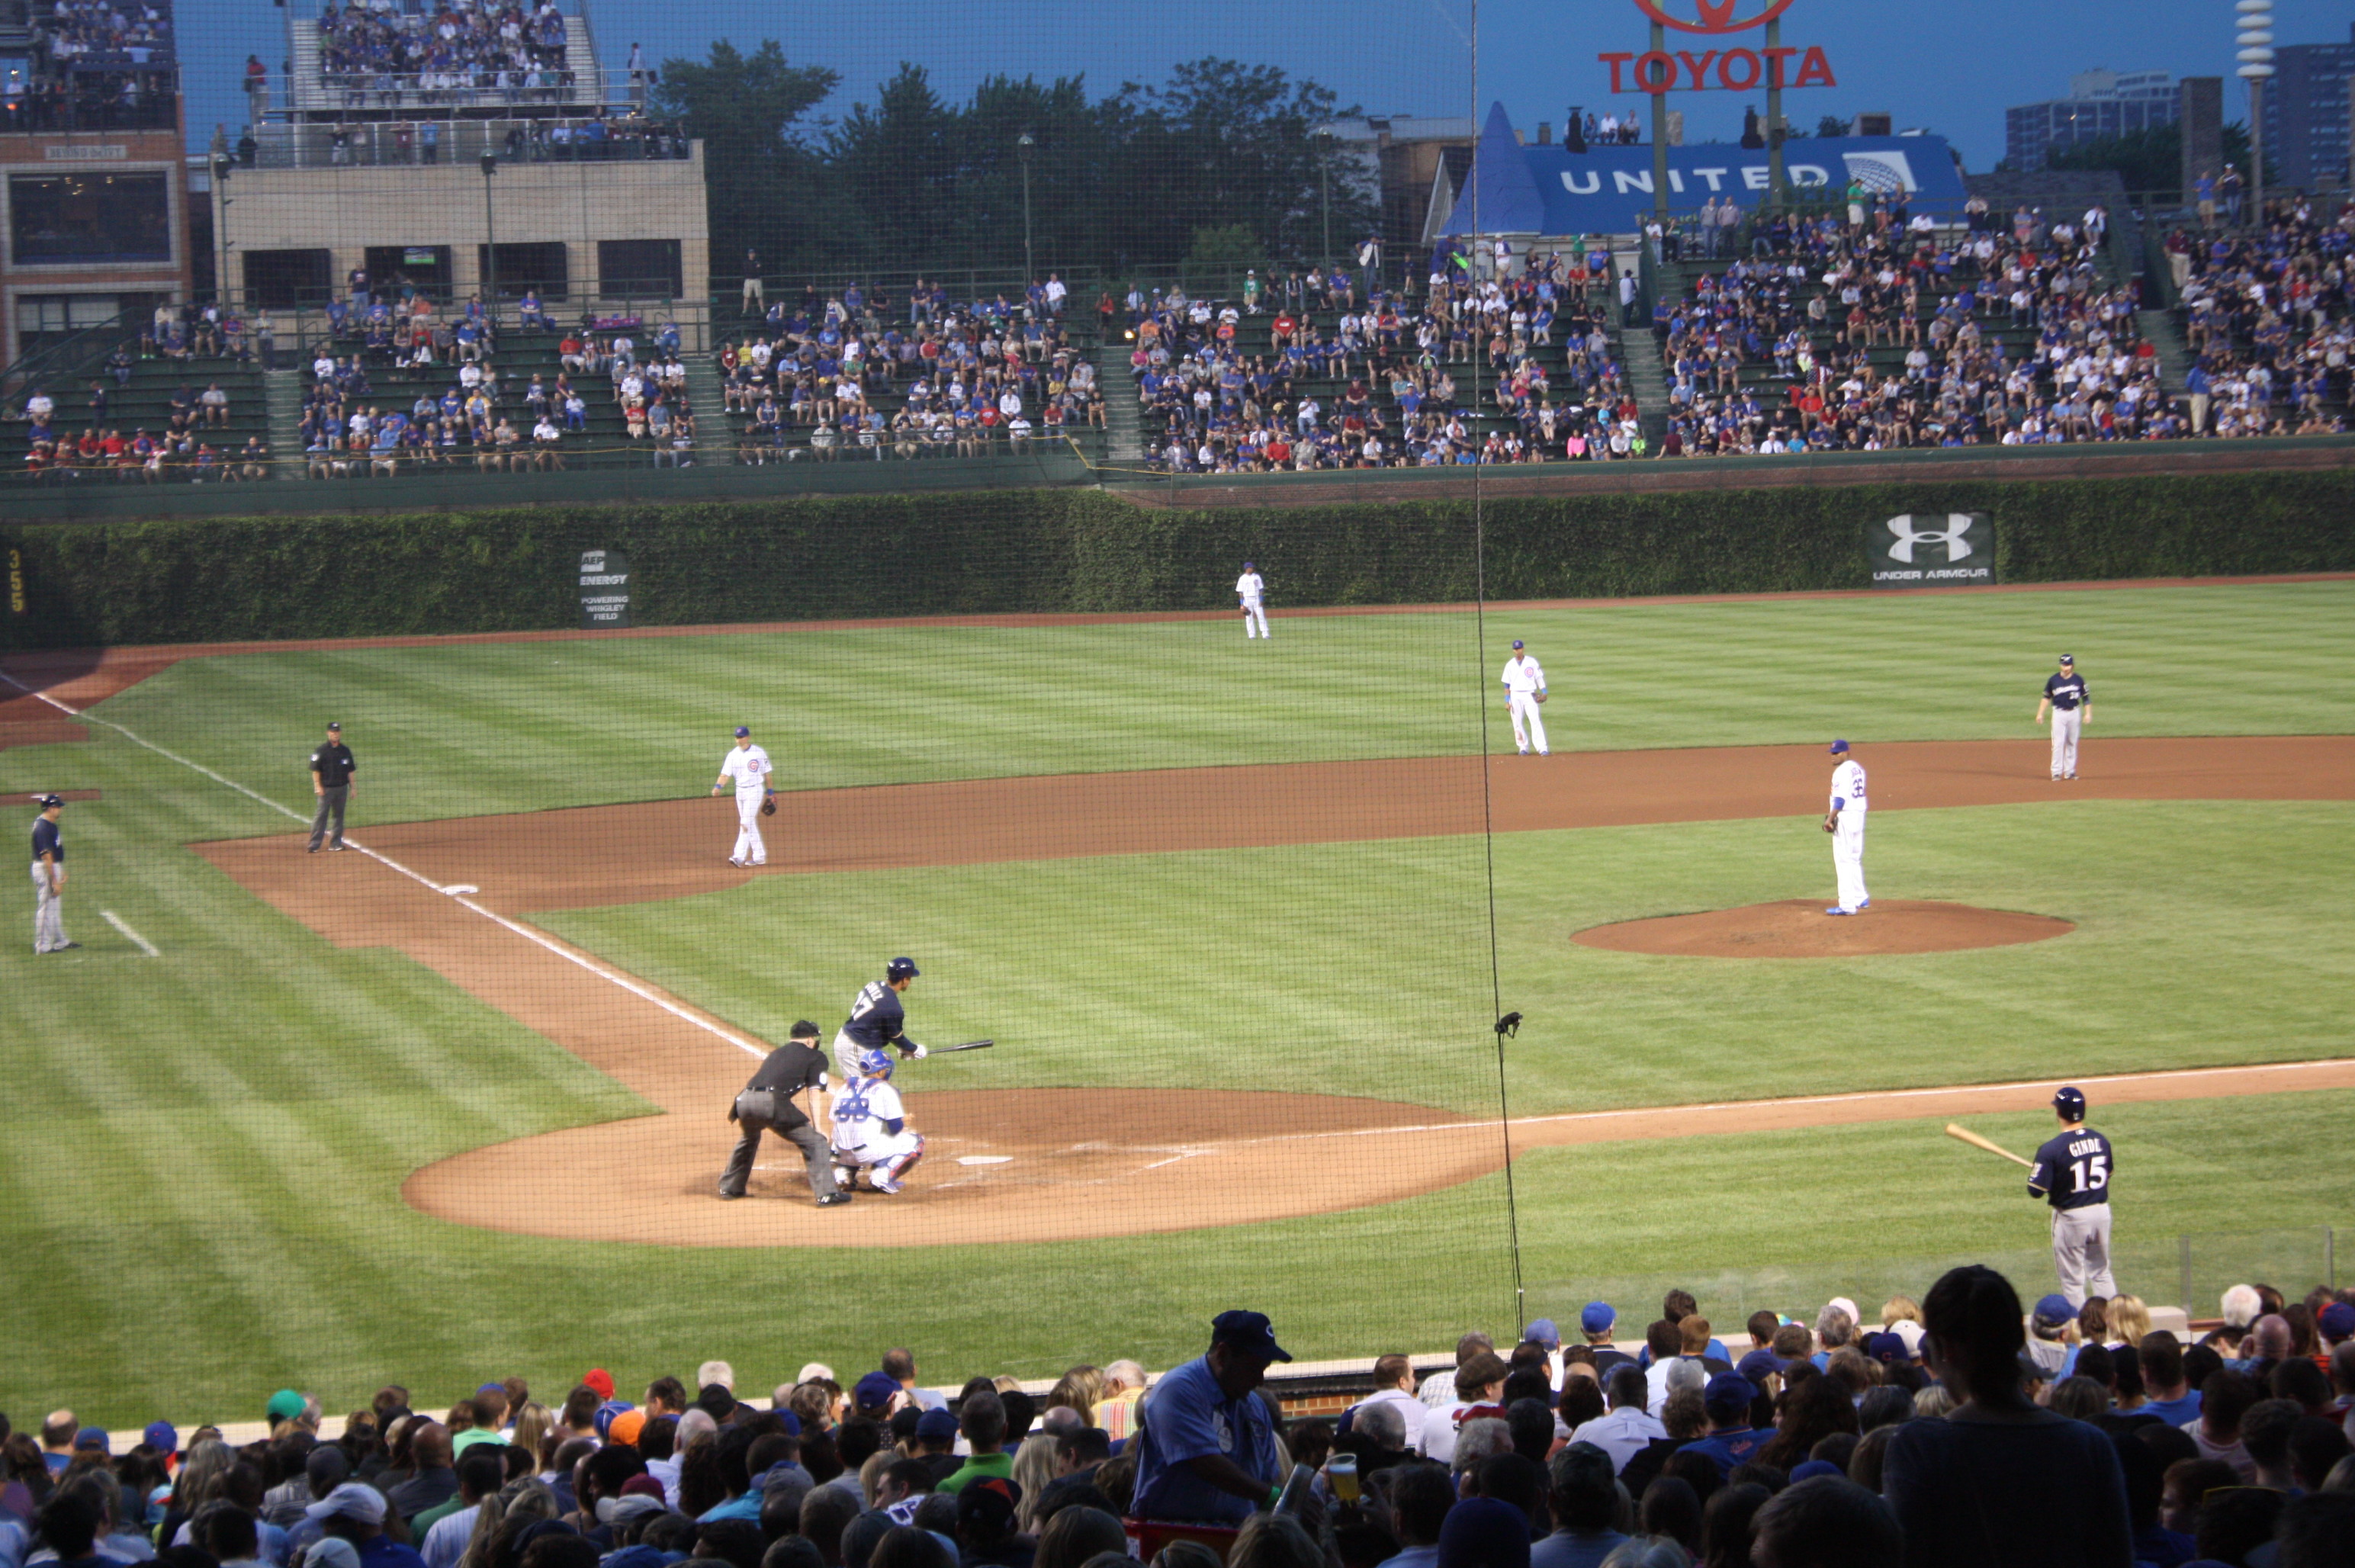 Chicago Cubs at Wrigley Field